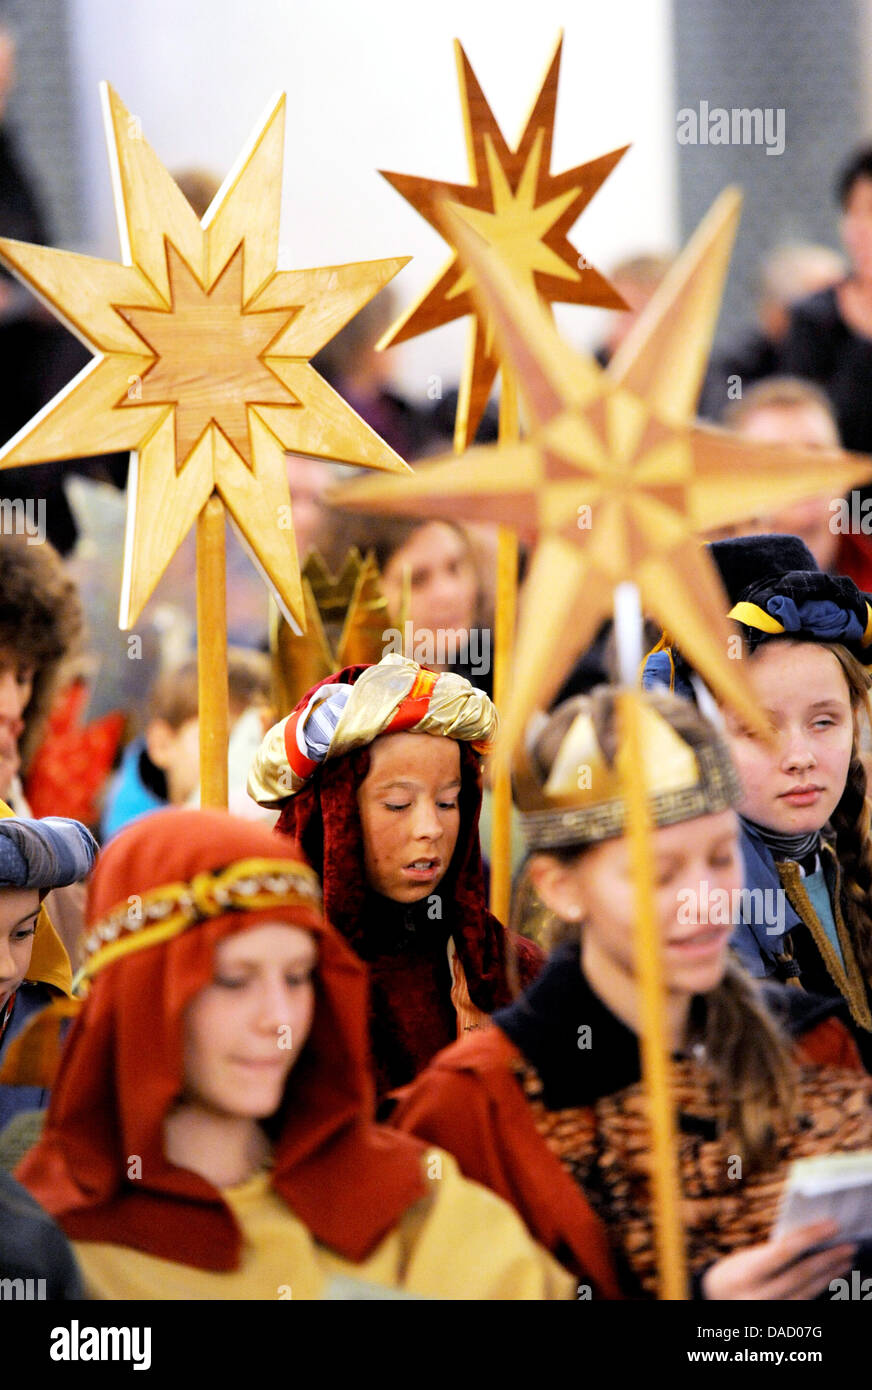 Children dressed as star singers attend the valedictory service with Arch bishop Woelki in Berlin, Germany, 27 December 2011 teil. The action is held under the motto 'Knock on doors, insist on your rights' and wishes to call attention to the rights of children. Photo: MAURIZIO GAMBARINI Stock Photo